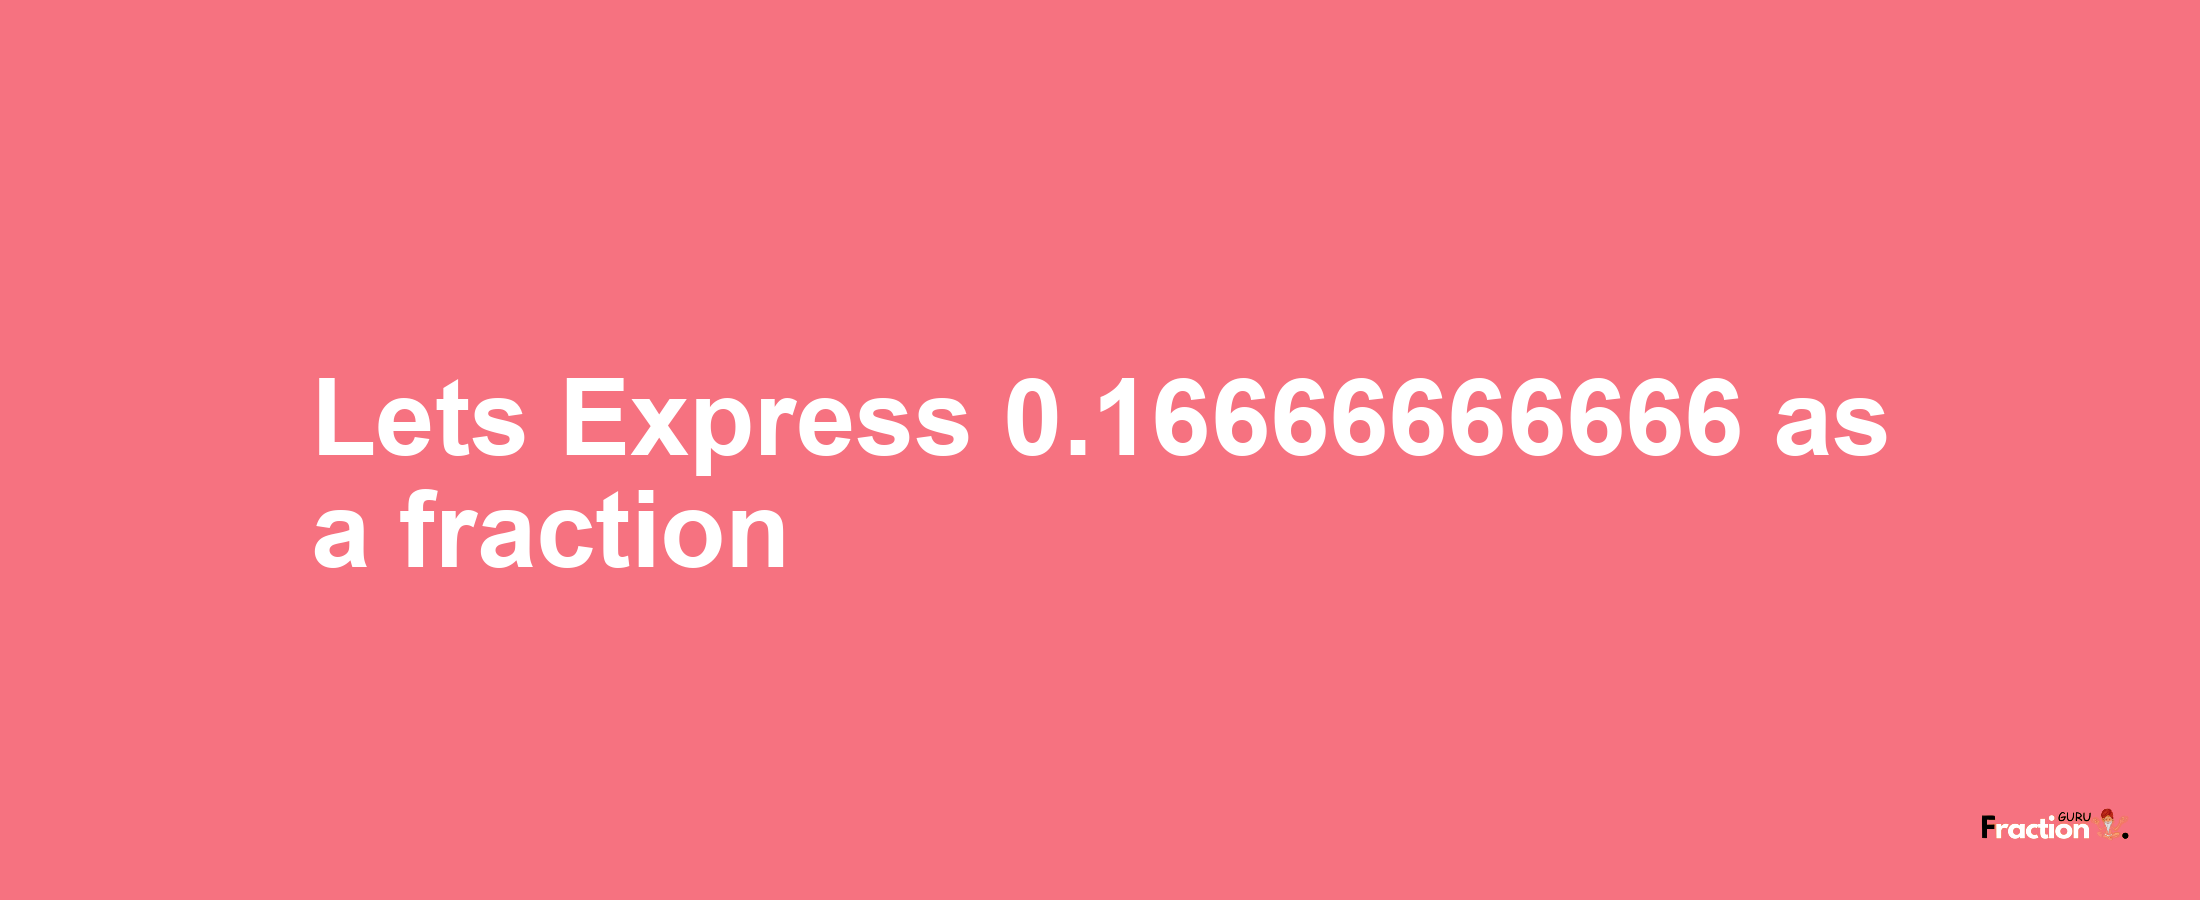 Lets Express 0.16666666666 as afraction